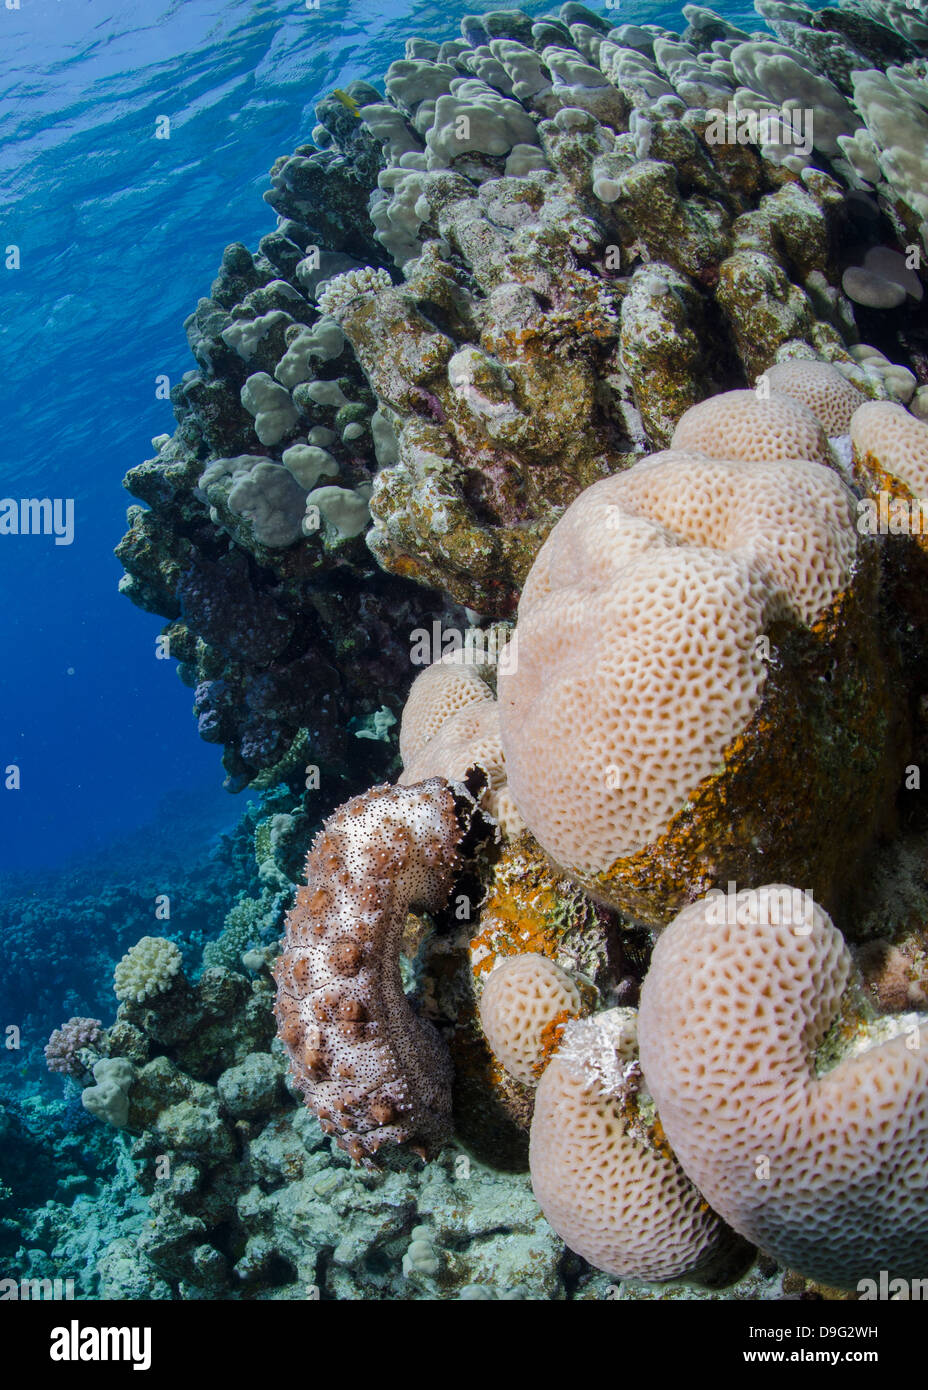 Blackmouth sea cucumber on coral reef, Ras Mohammed National Park, Sharm Eel-Sheikh, Red Sea, Egypt, Africa Stock Photo